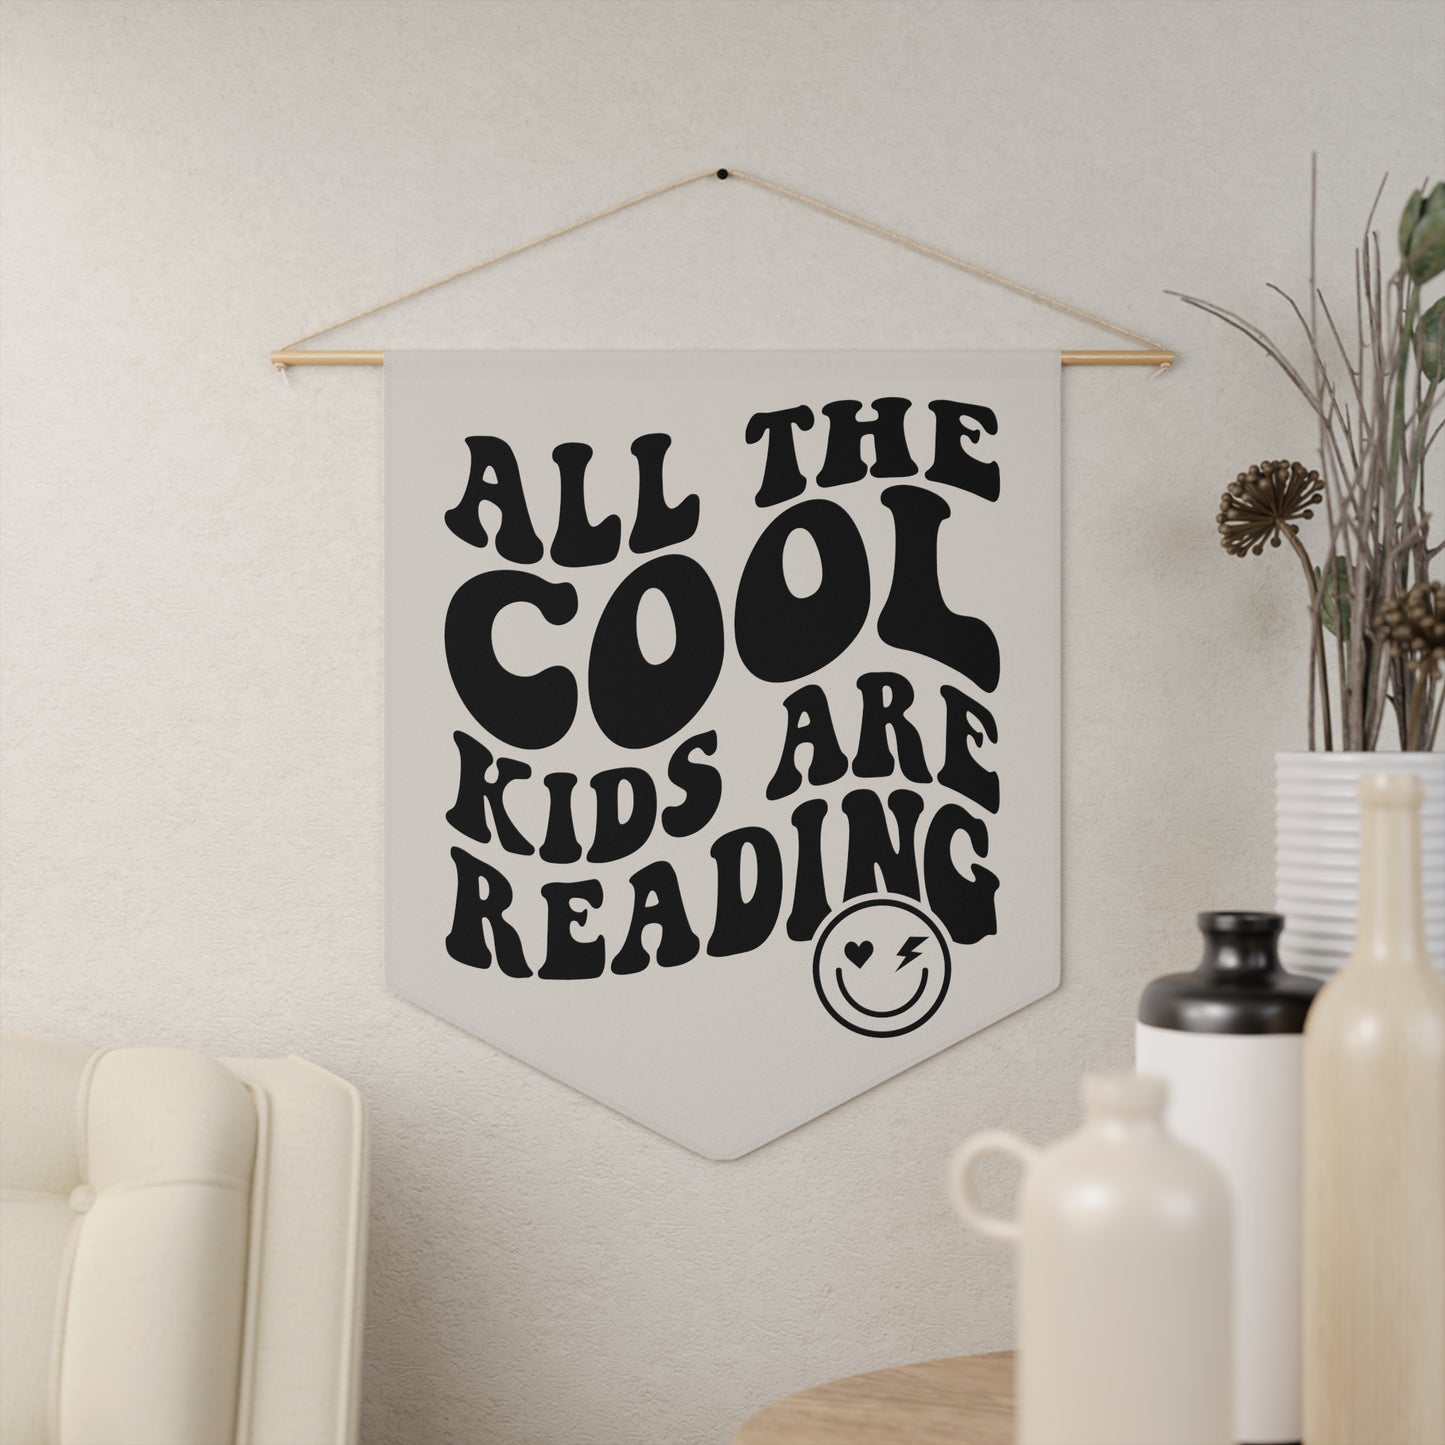 All The Cool Kids Are Reading - Retro Library and Classroom Decor